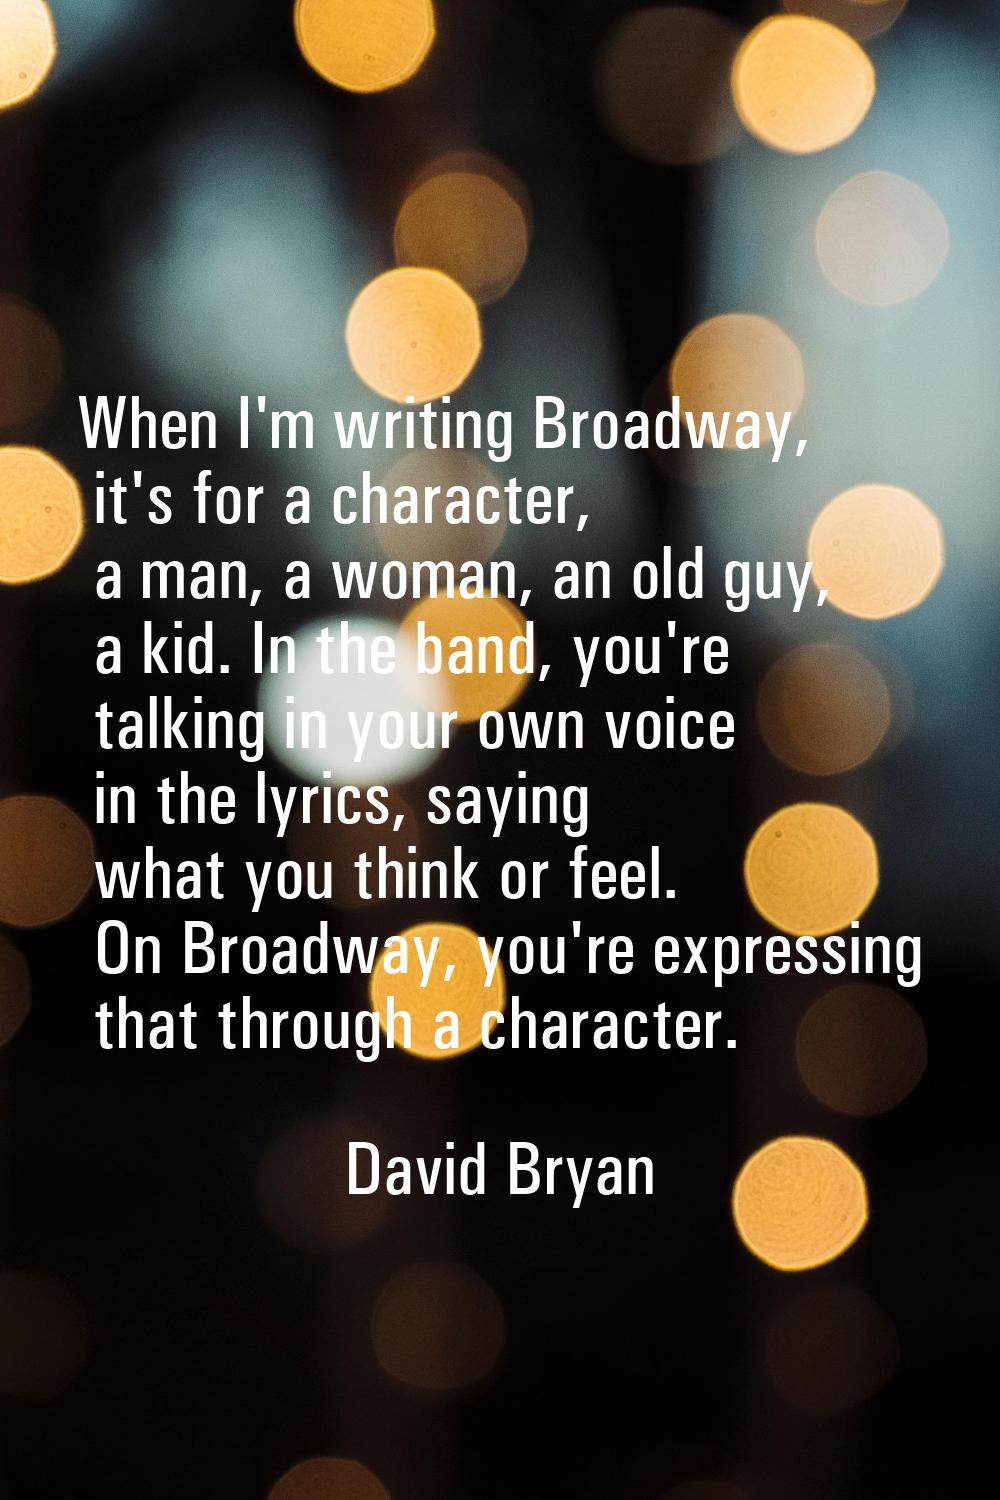 When I'm writing Broadway, it's for a character, a man, a woman, an old guy, a kid. In the band, yo